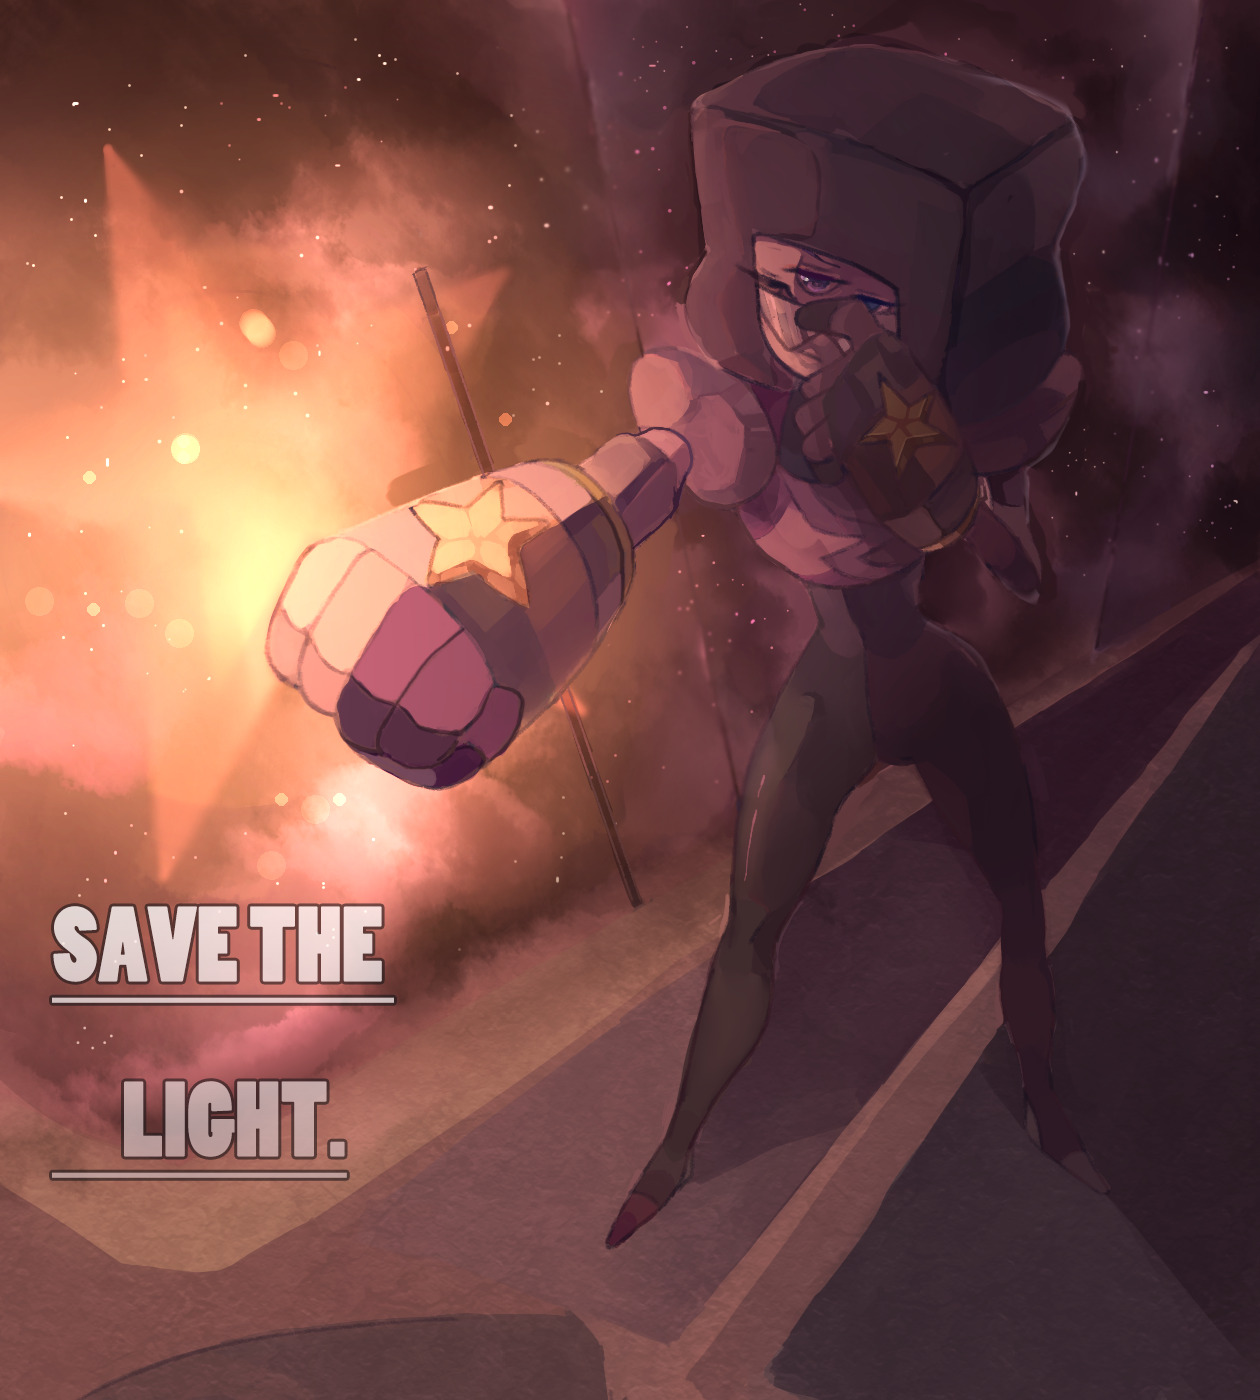 The first picture is one attack of Garnet in SAVE THE LIGHT：D she’s my favorite gem.